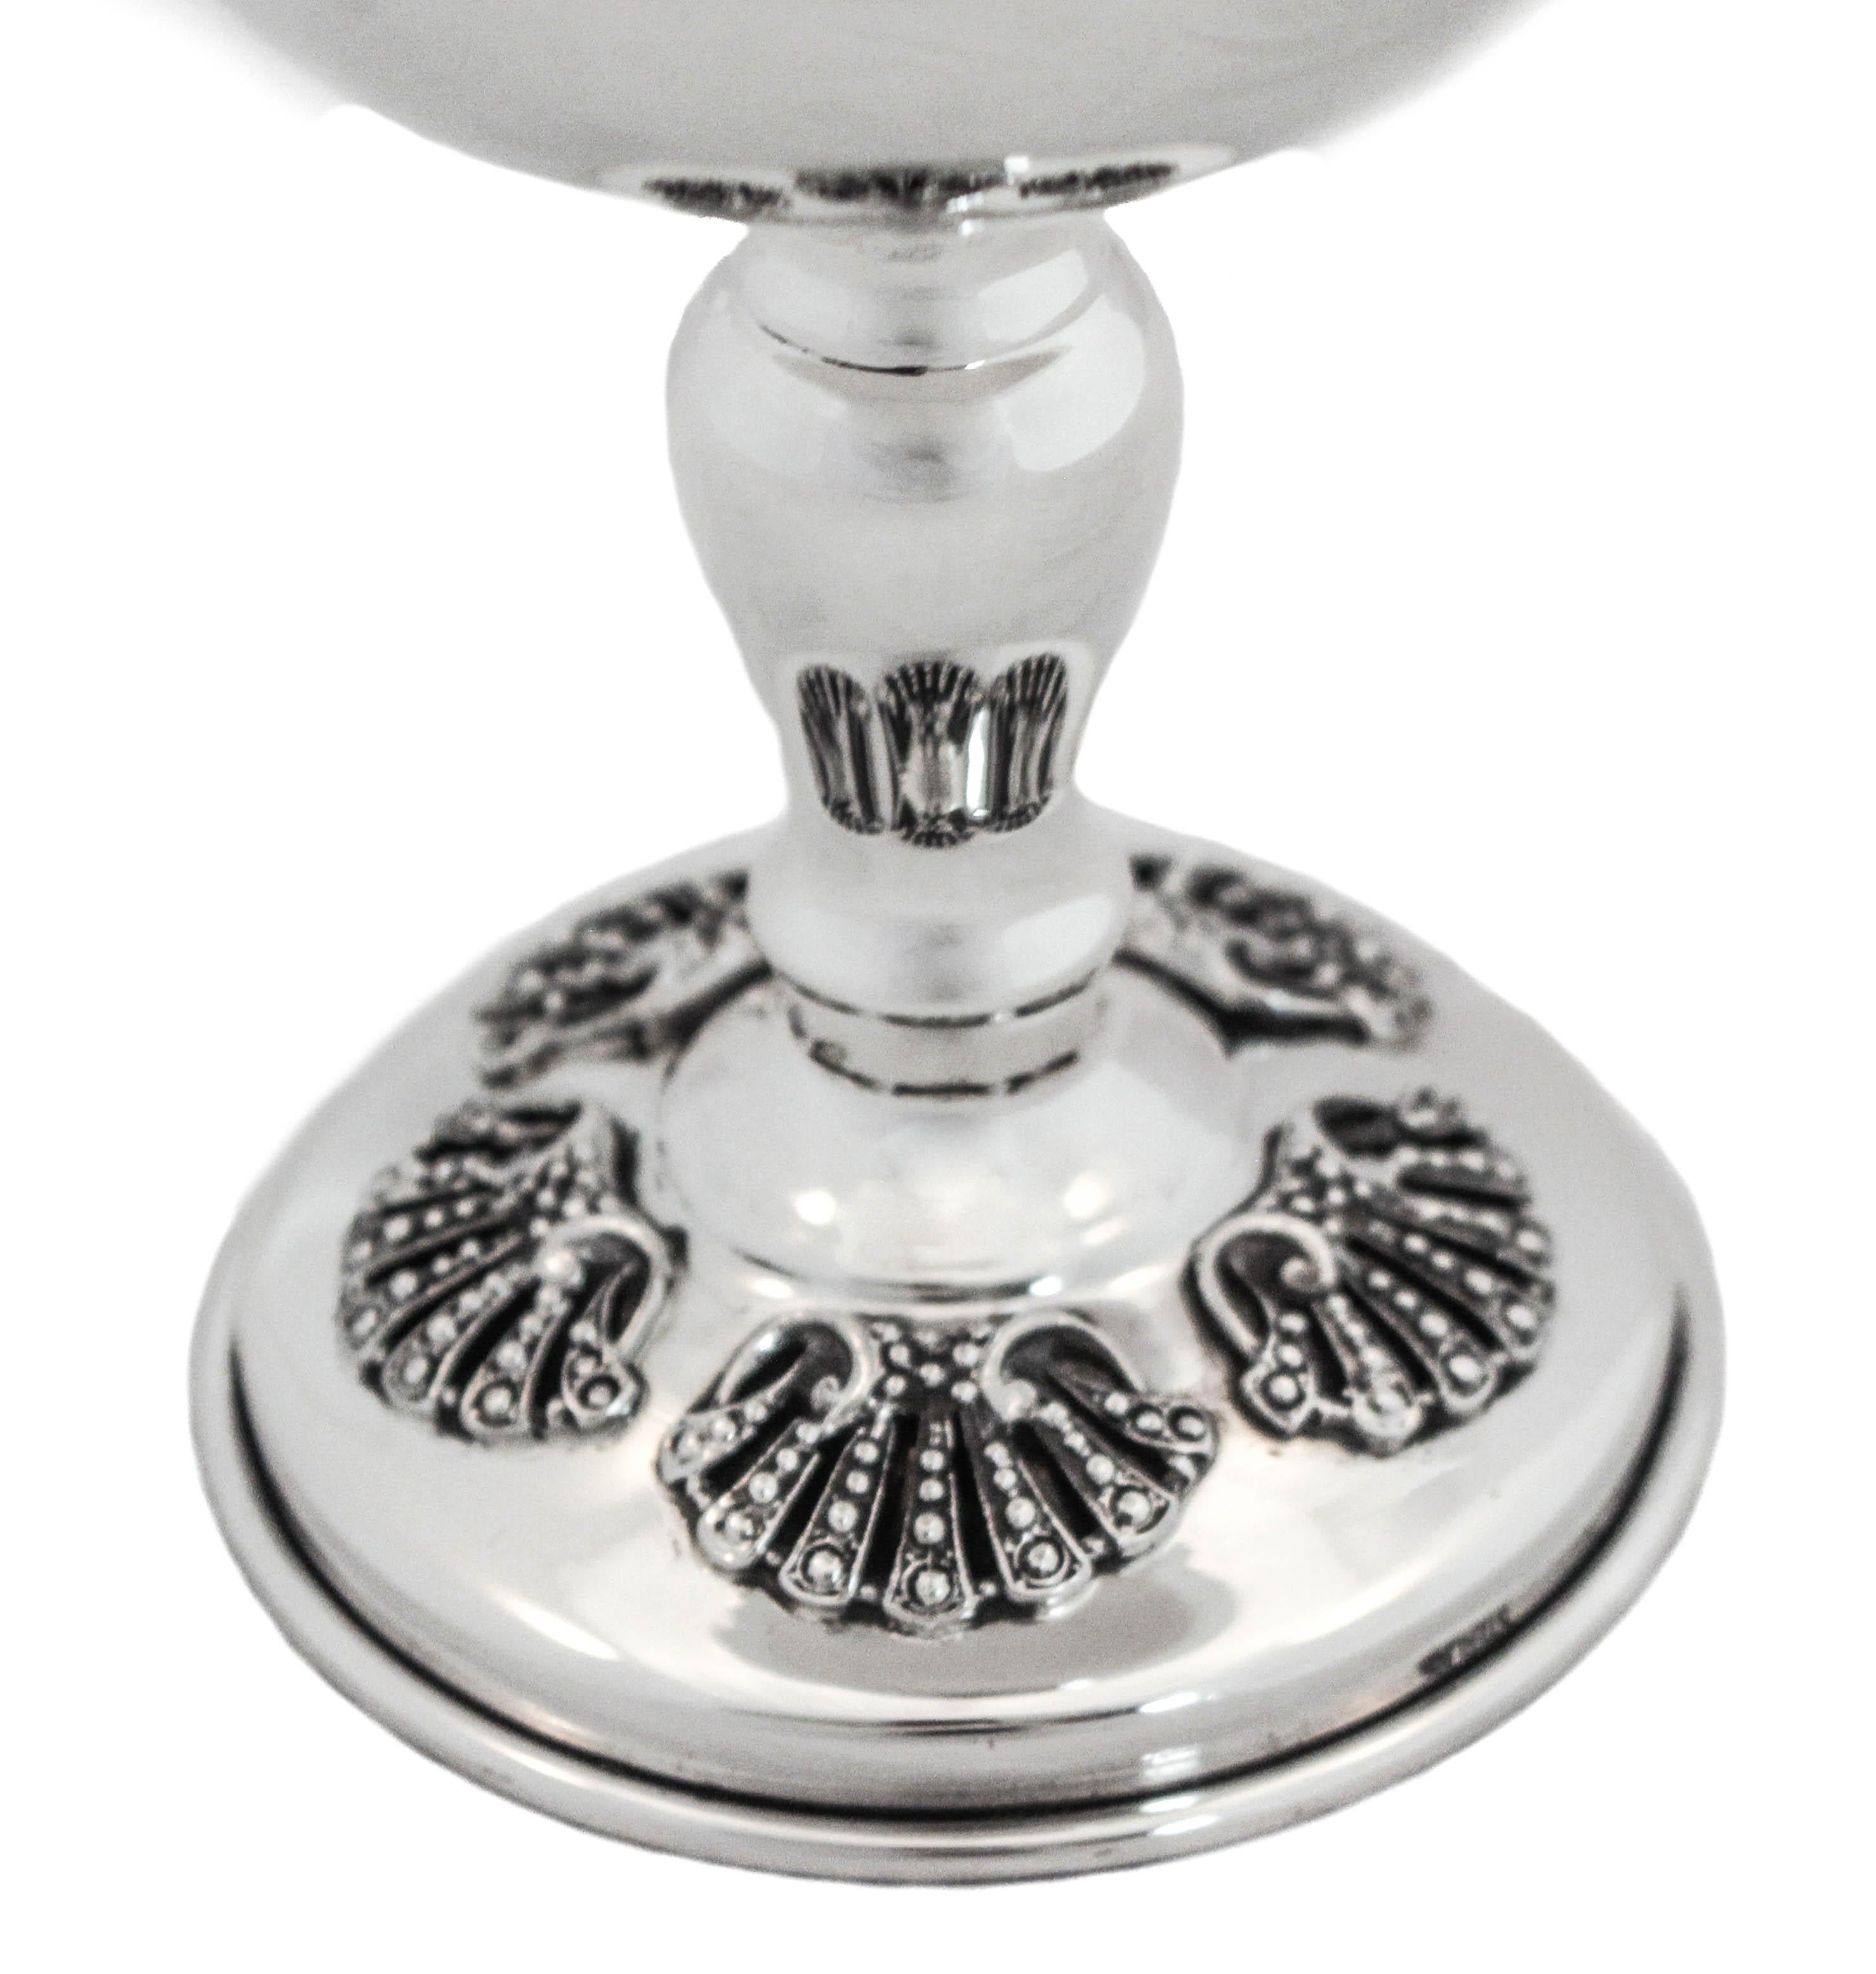 Late 20th Century Sterling Silver Goblet / Kiddush Cup